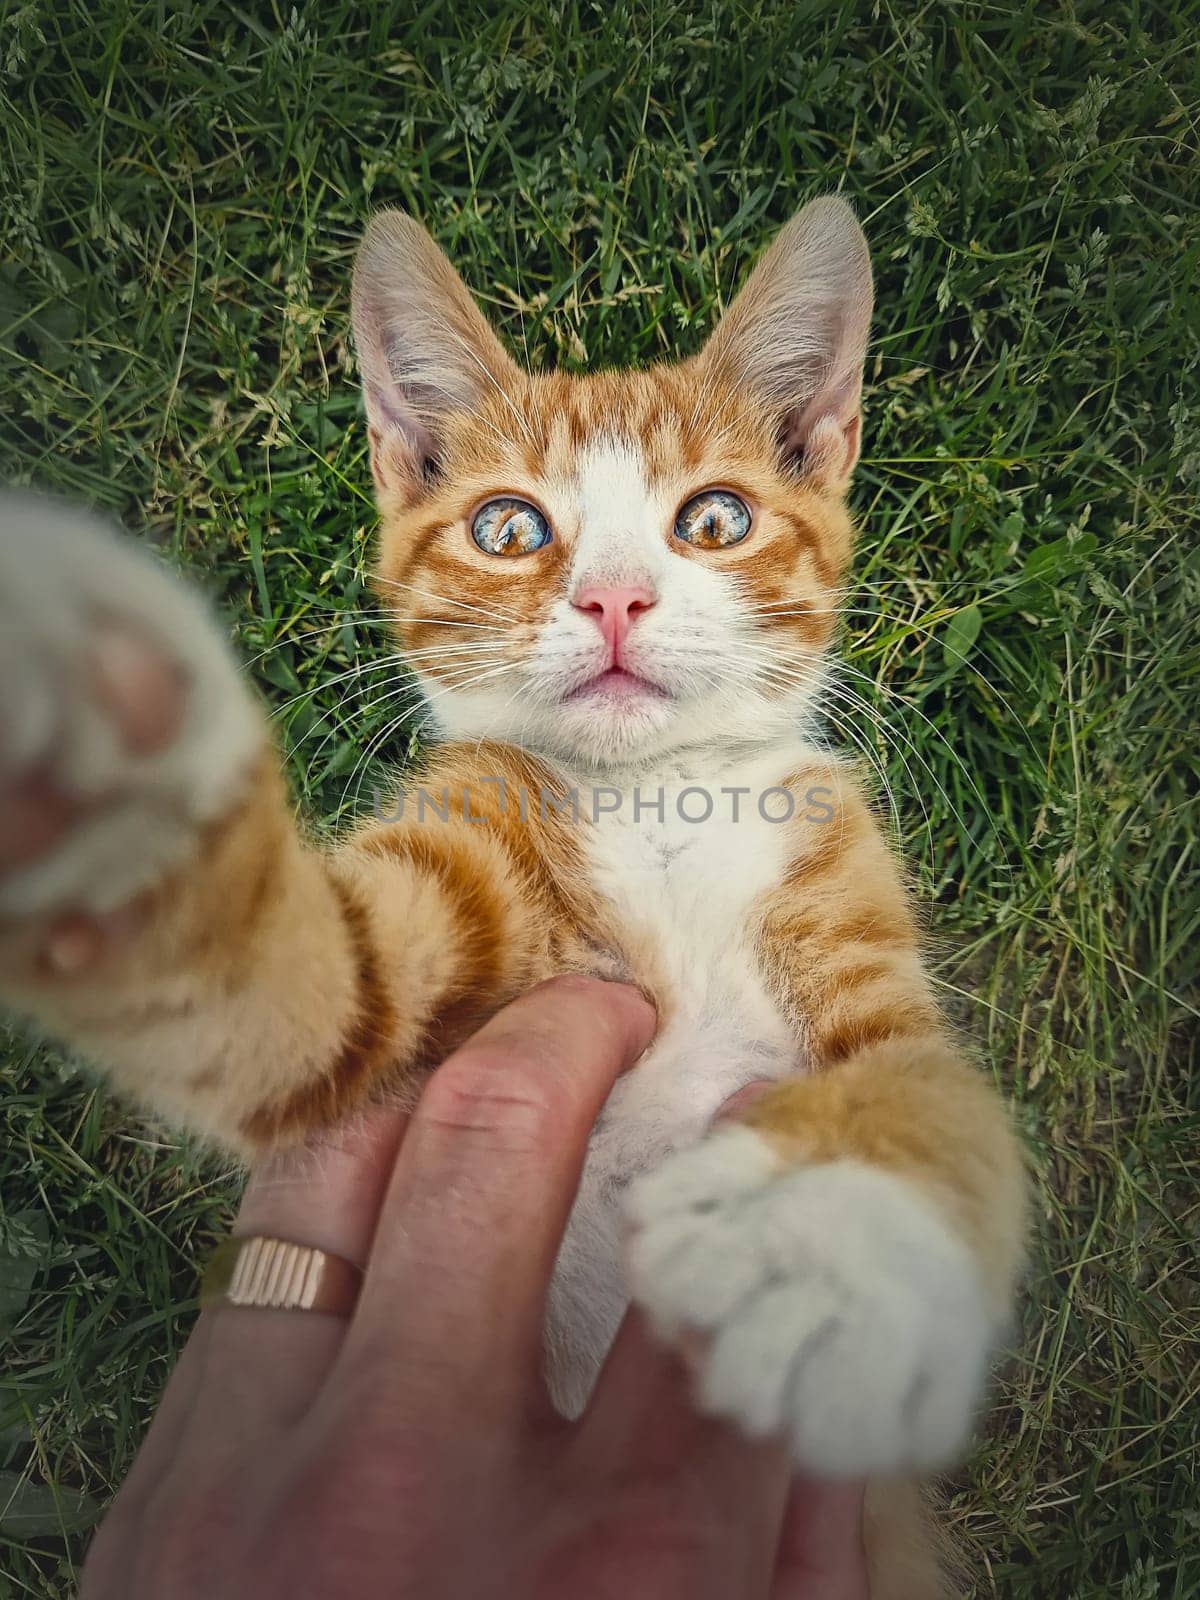 Owner petting his orange tomcat. Playful ginger cat lying on his back in the green grass. Frisky kitten, cute caressing scene in the nature by psychoshadow